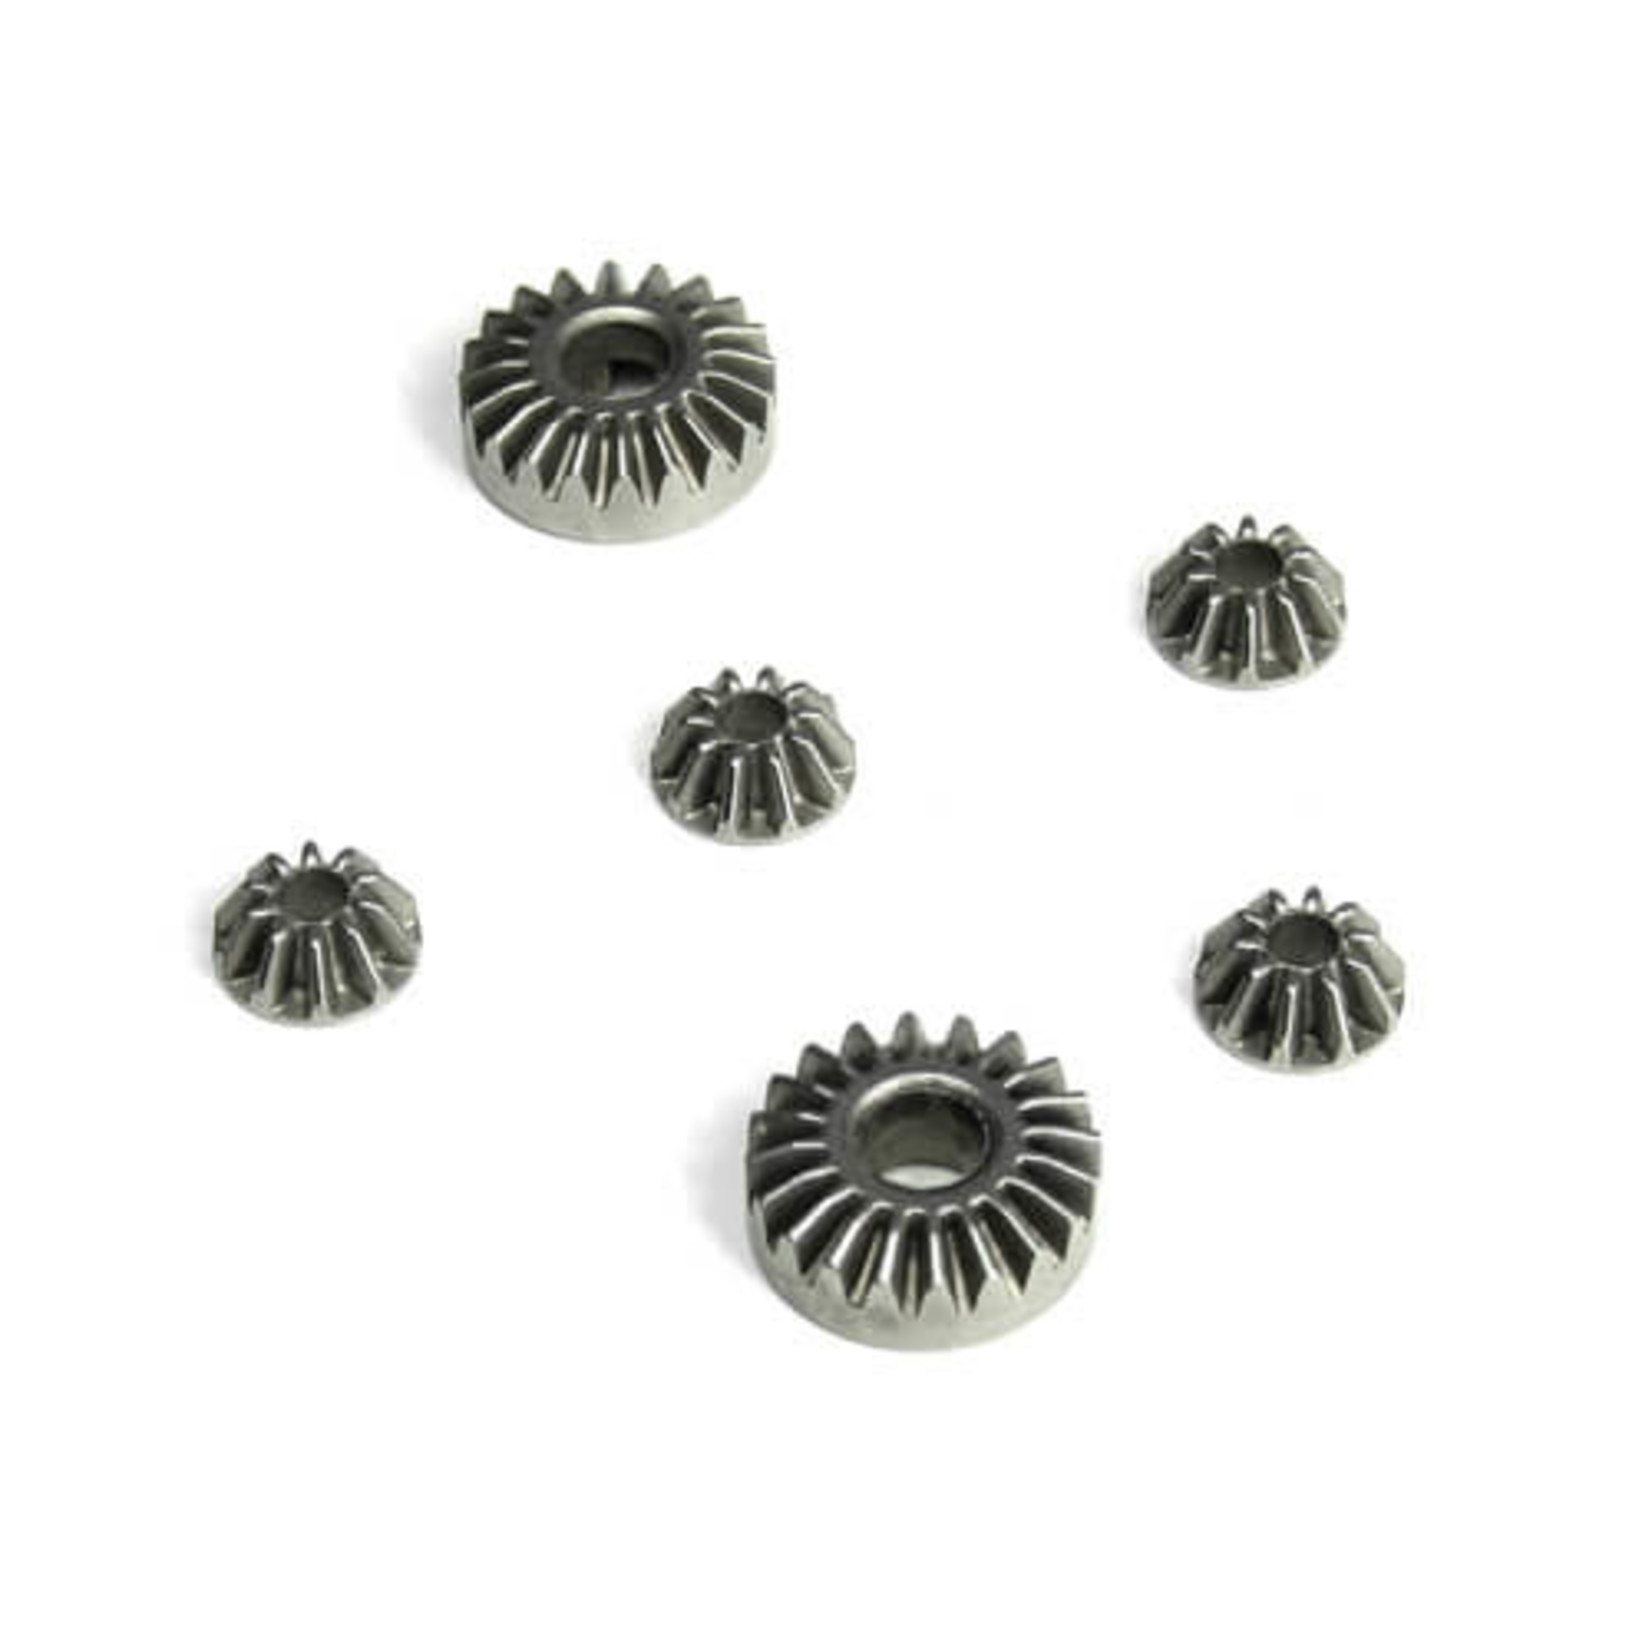 Tekno RC TKR6550 Tekno RC Differential Gear Set (internal gears only, EB410)